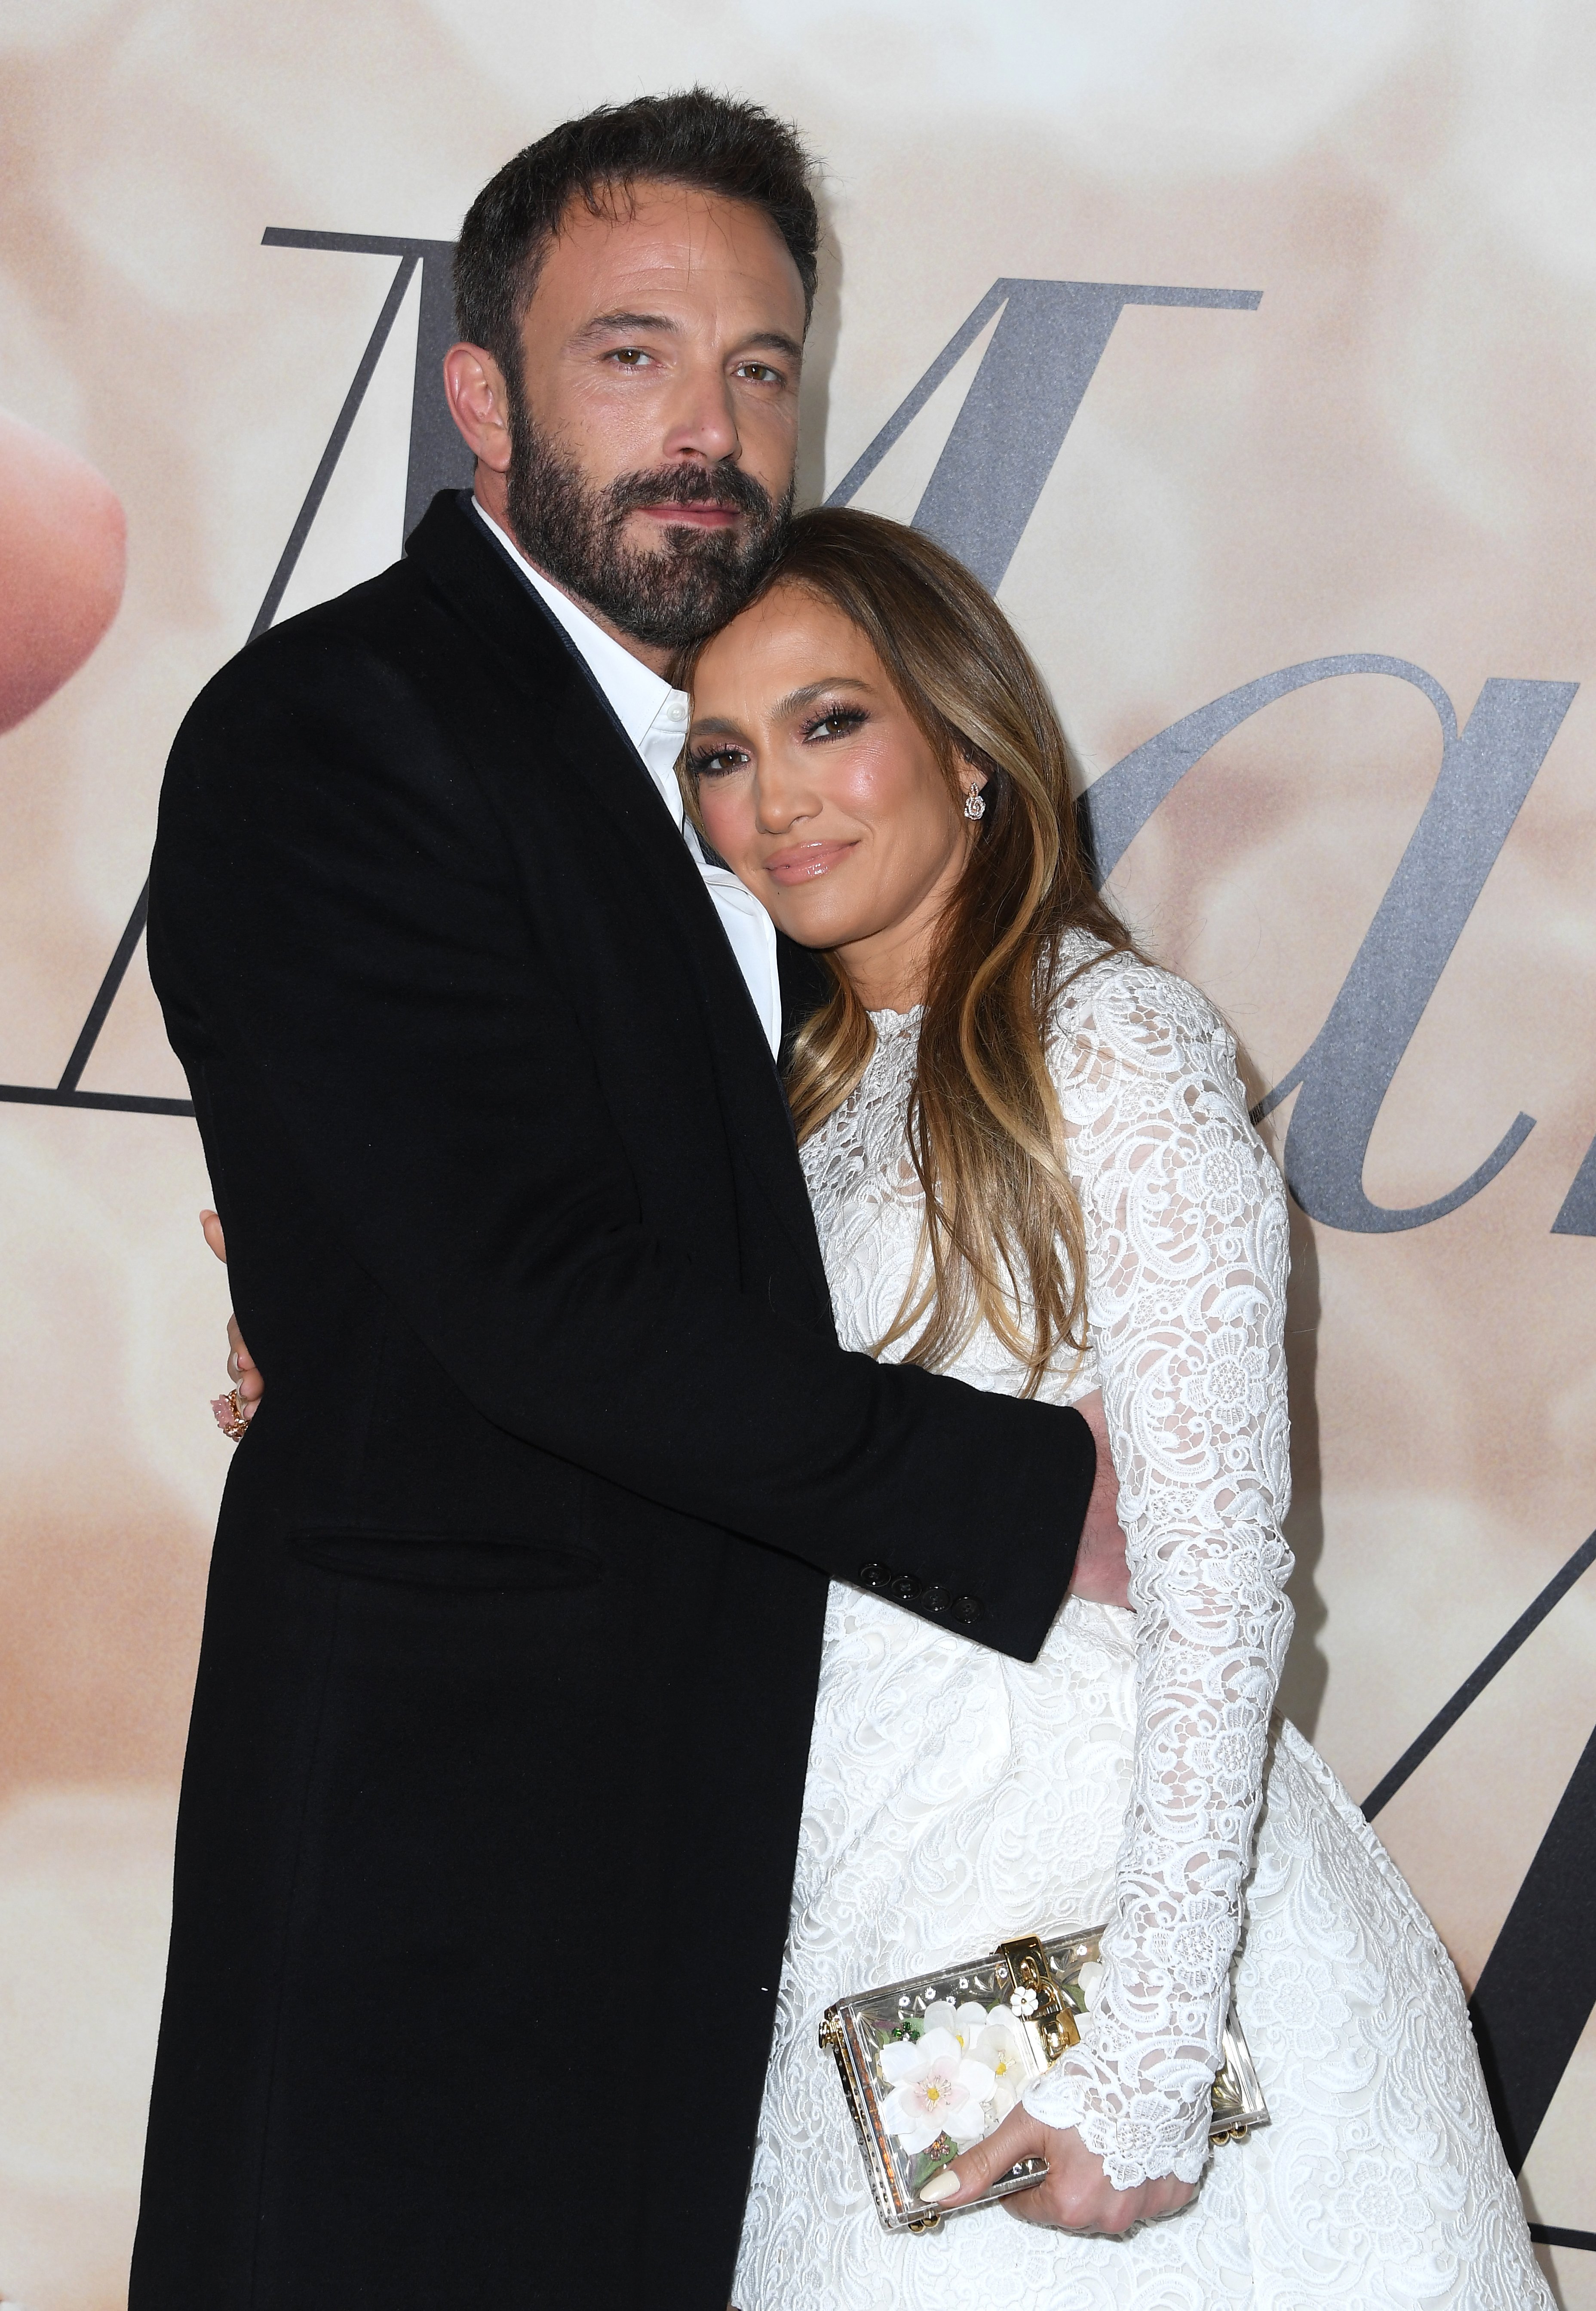 Ben Affleck and Jennifer Lopez in California 2022. | Source: Getty Images